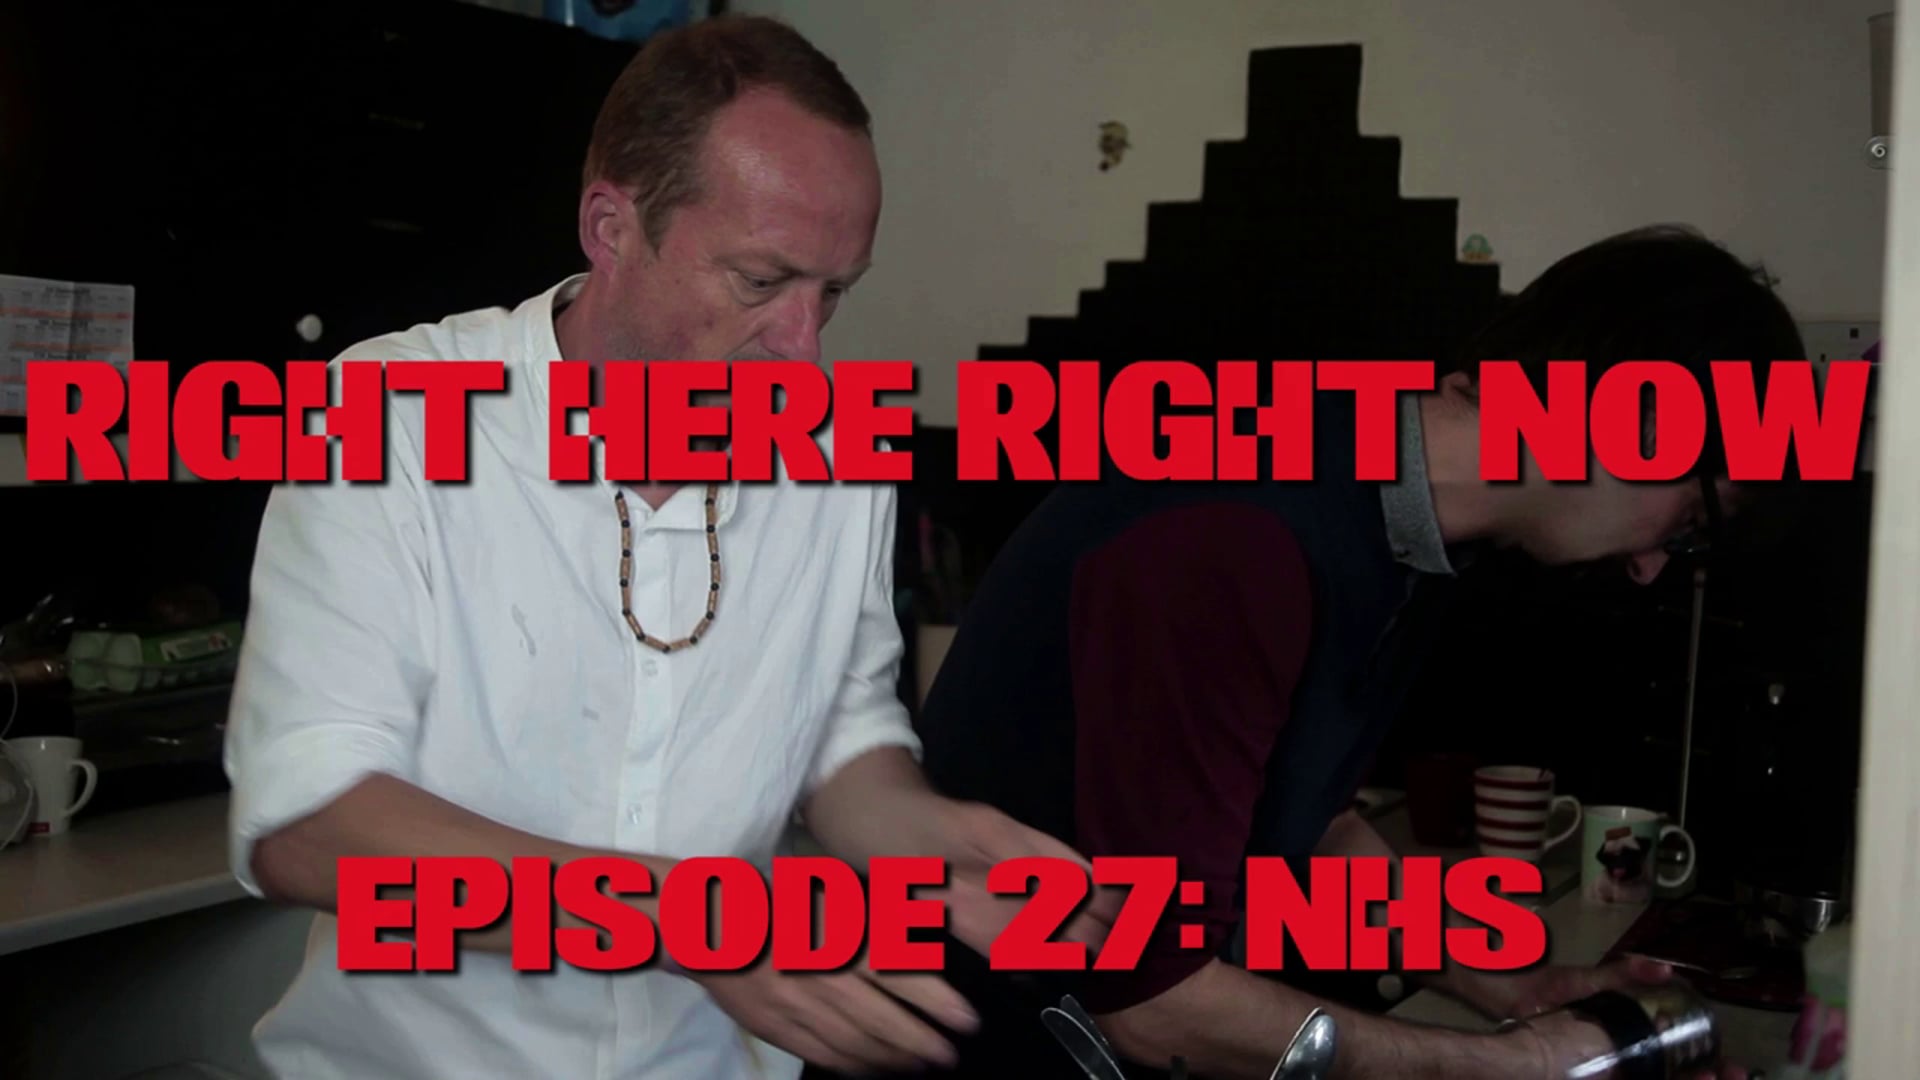 Watch Right Here Right Now: Episode 27 (The NHS) on our Free Roku Channel